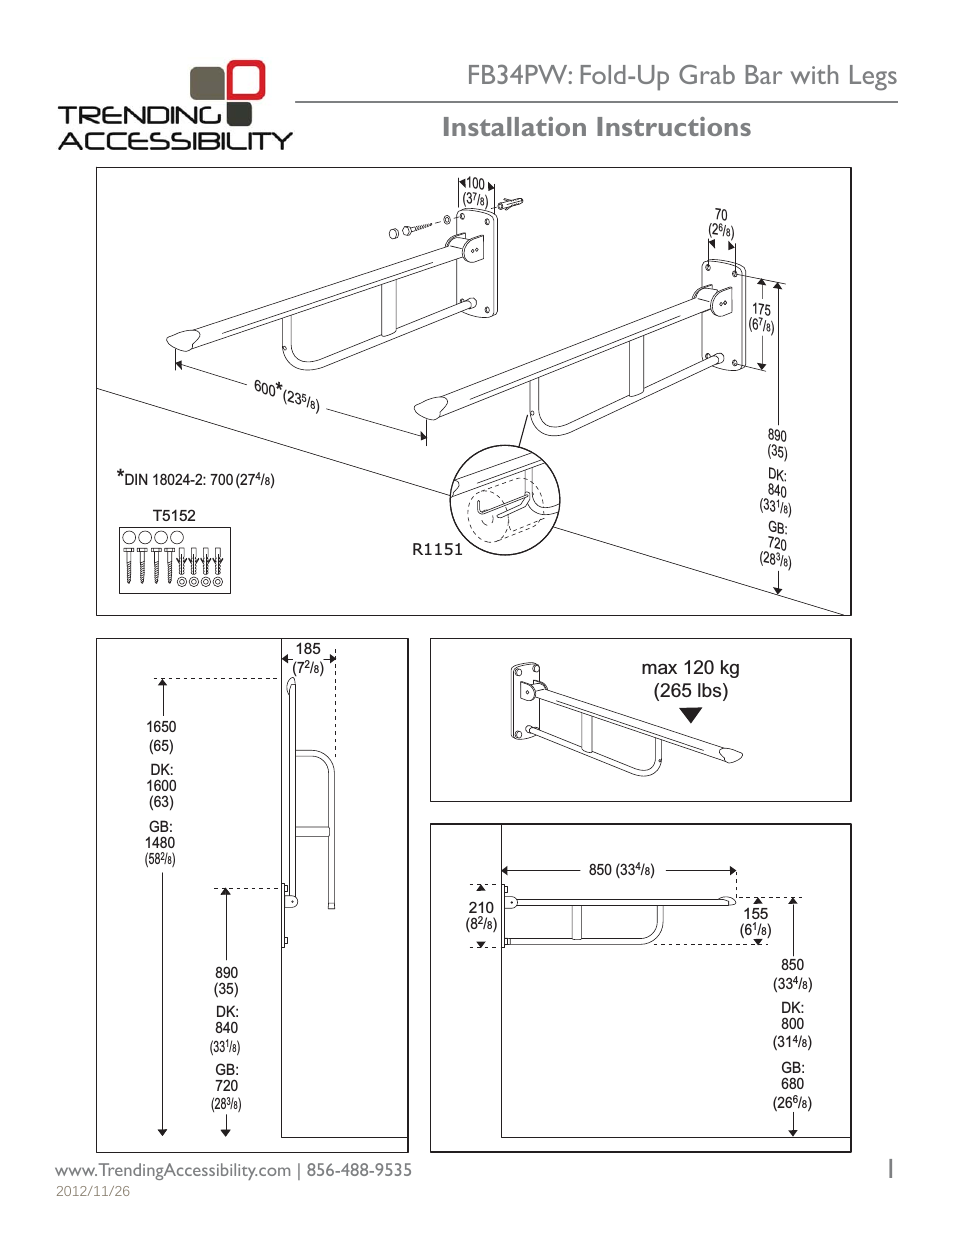 FB34PW: Fold-Up Grab Bar with Legs